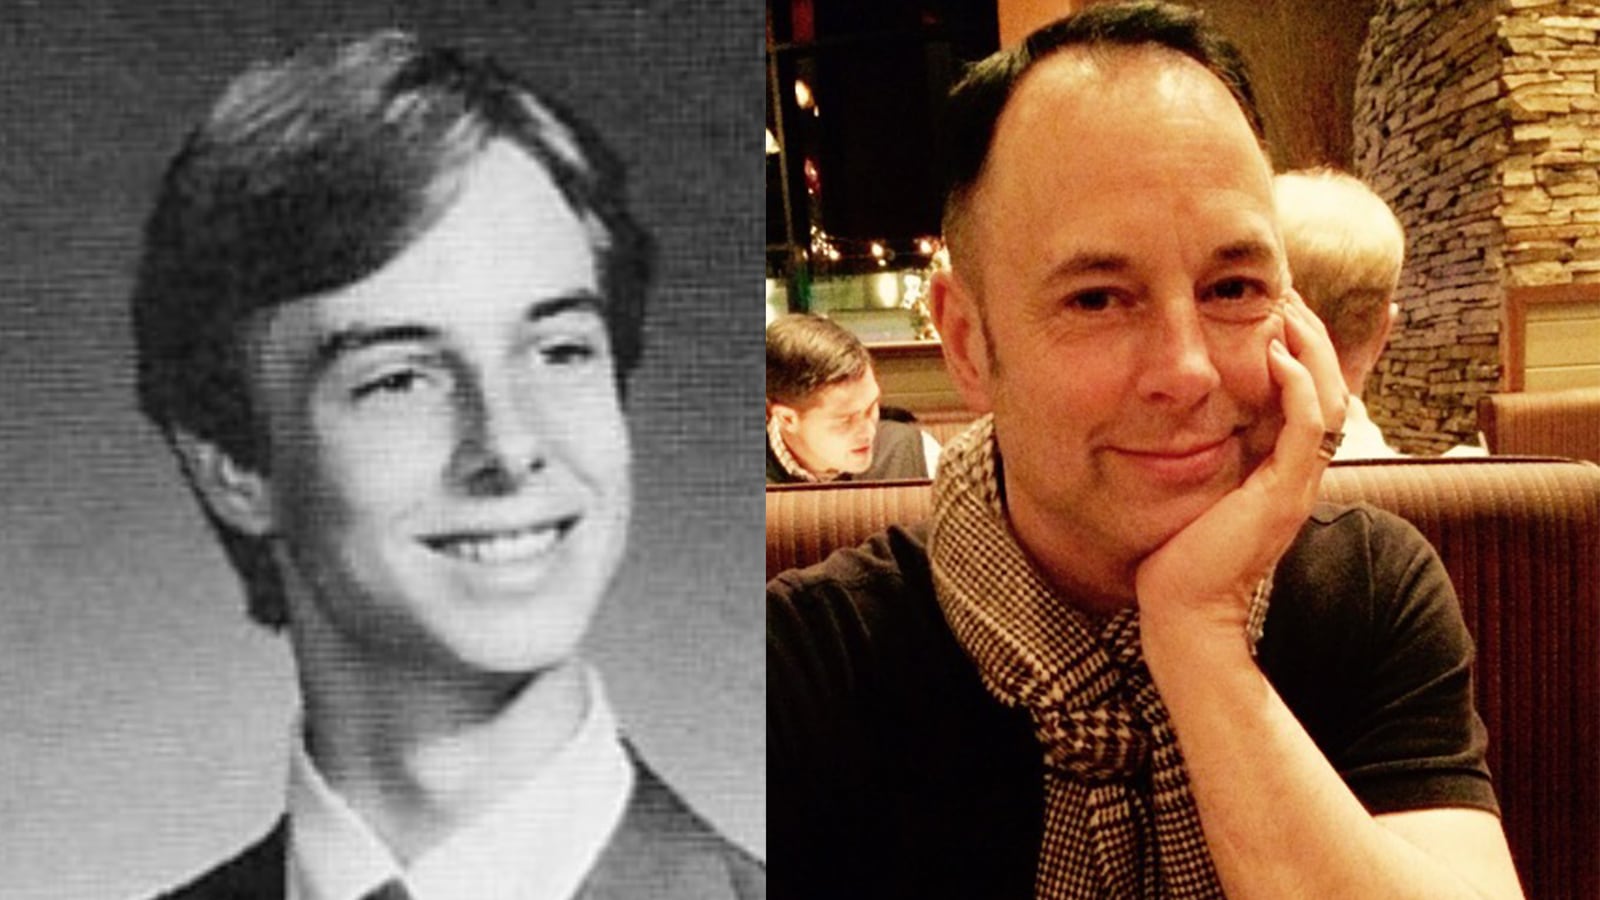 Bill Franklin, Northwest High School Class of 1980, as a high-schooler (left) and as an adult (right).